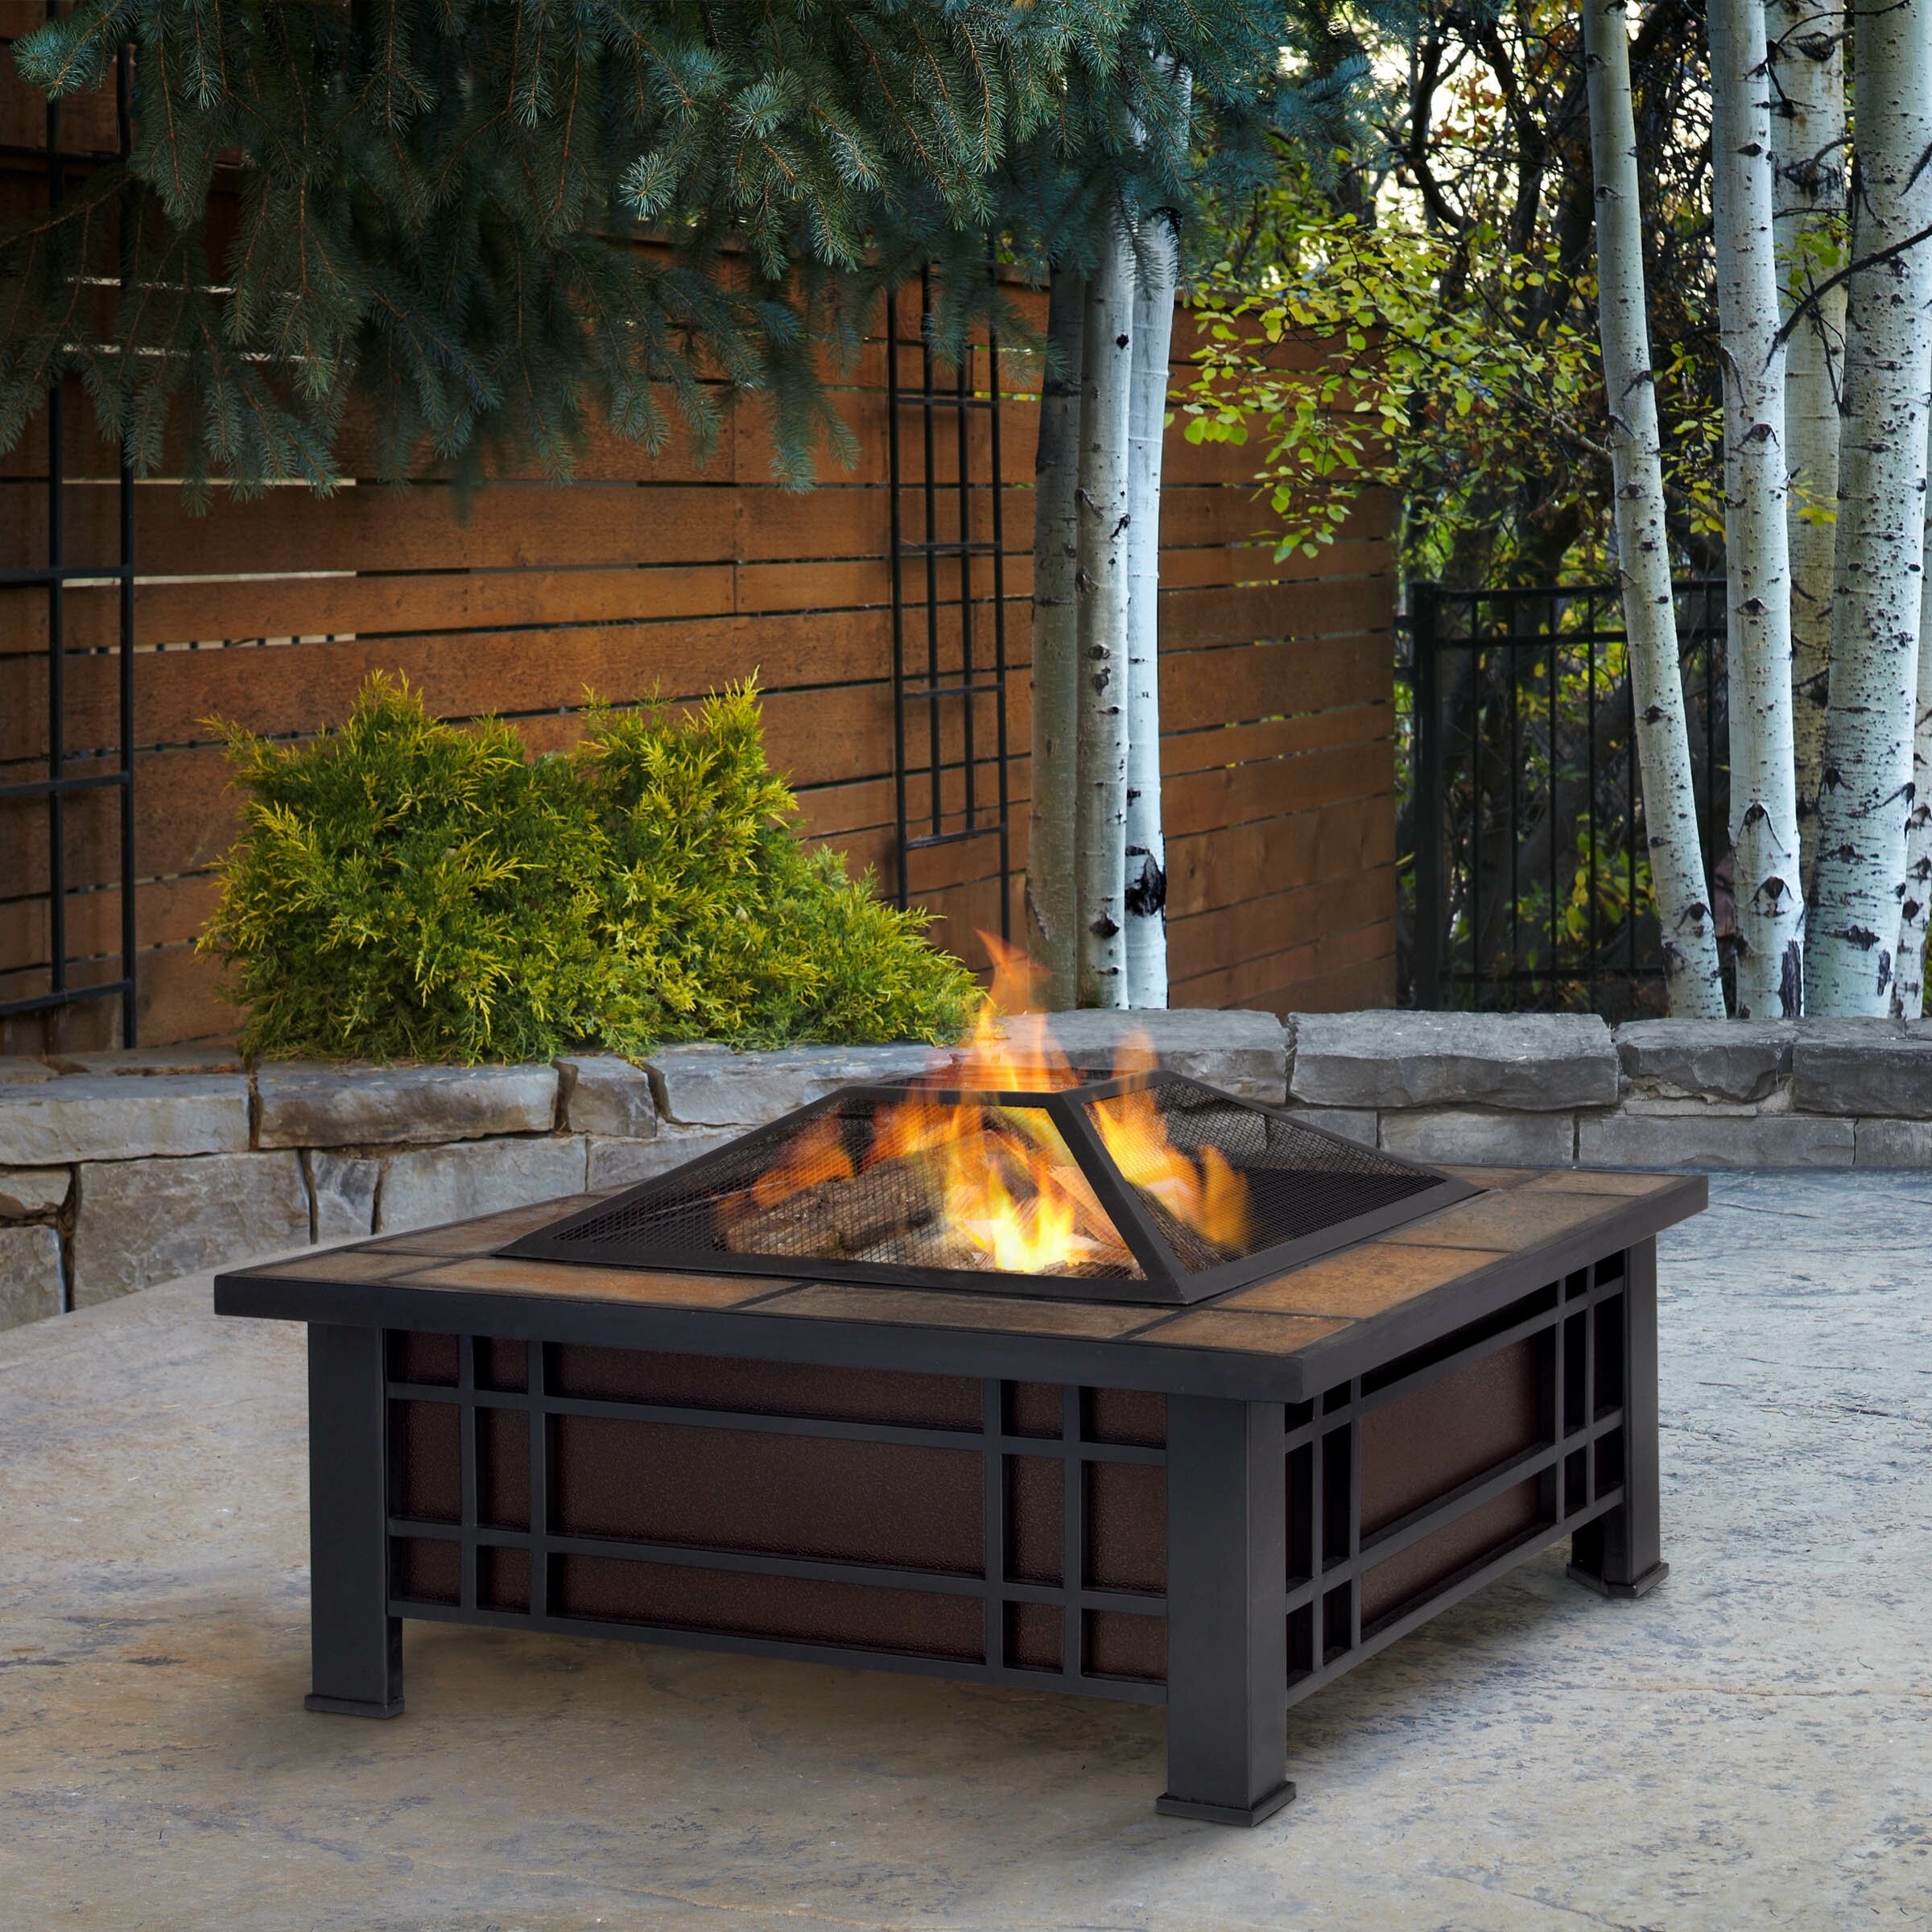 Wood Burning Fire Pit Table Visualhunt, Wood Burning Fire Pit Table And Chairs